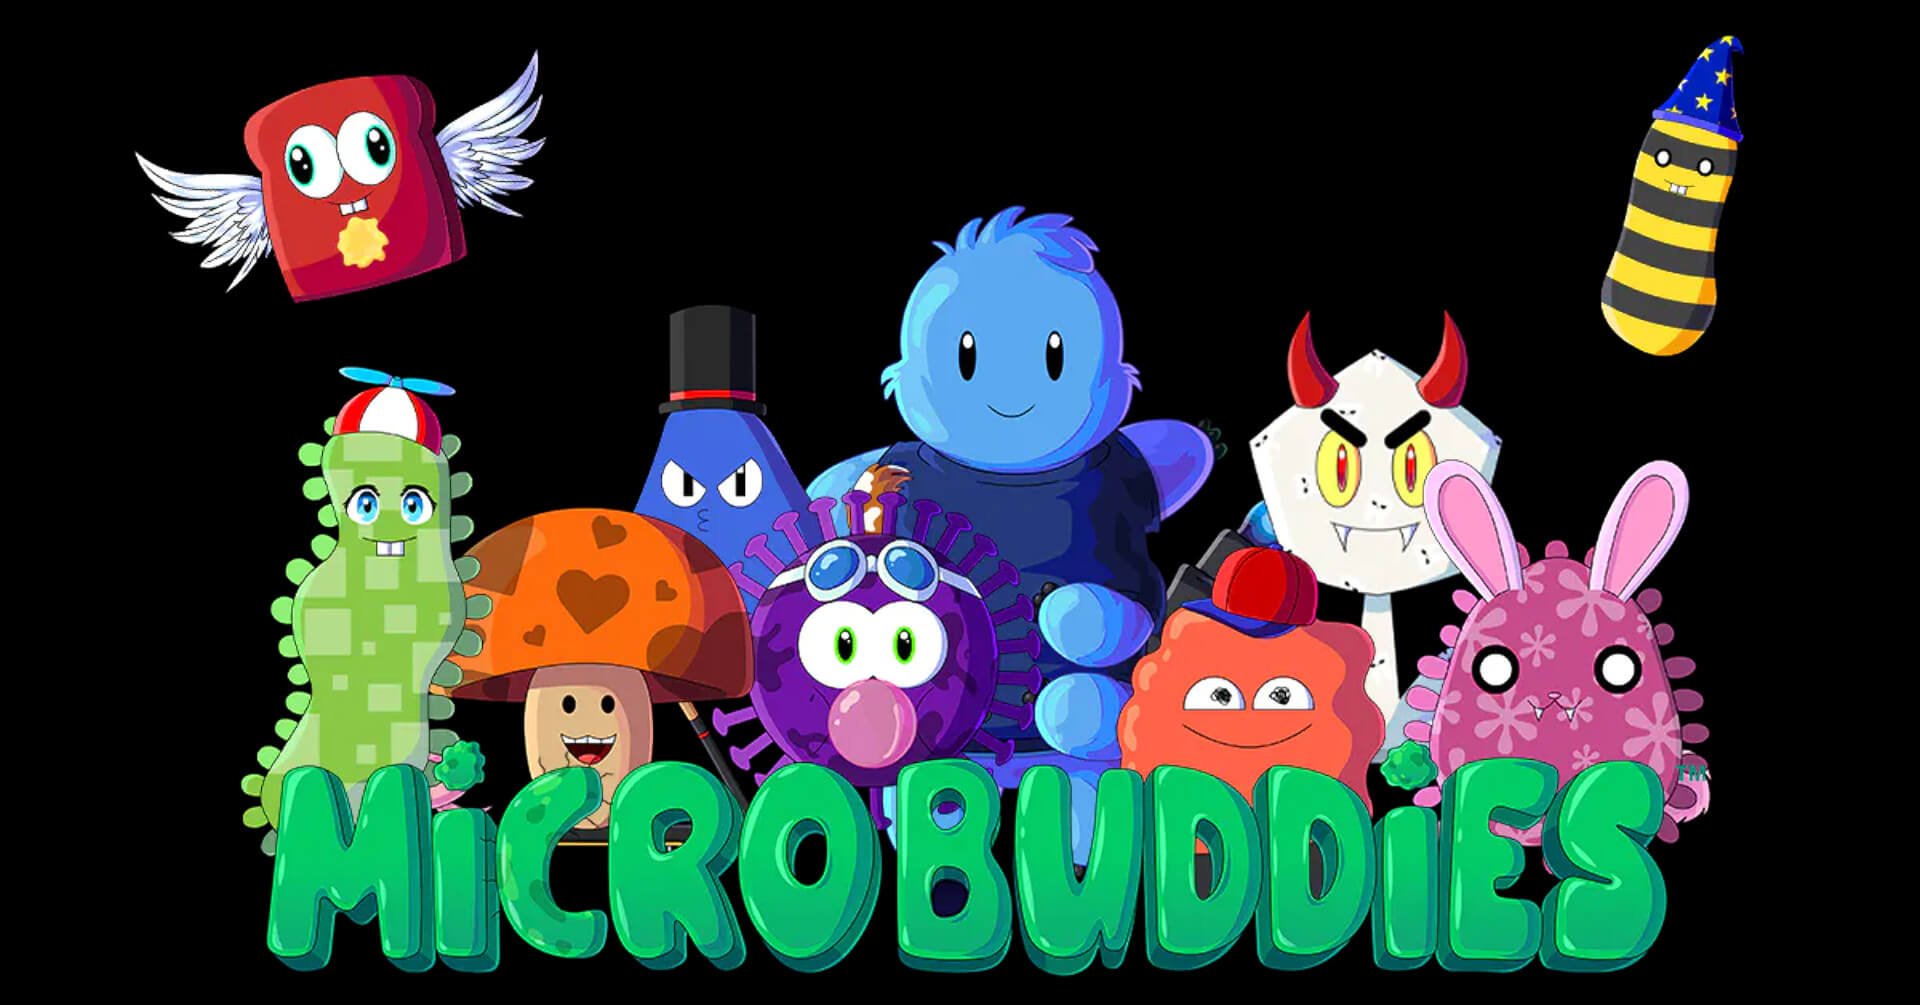 A set of creatures that make up the MicroBuddies NFT ecosystem, which will be integrated into a new Minecraft NFT game